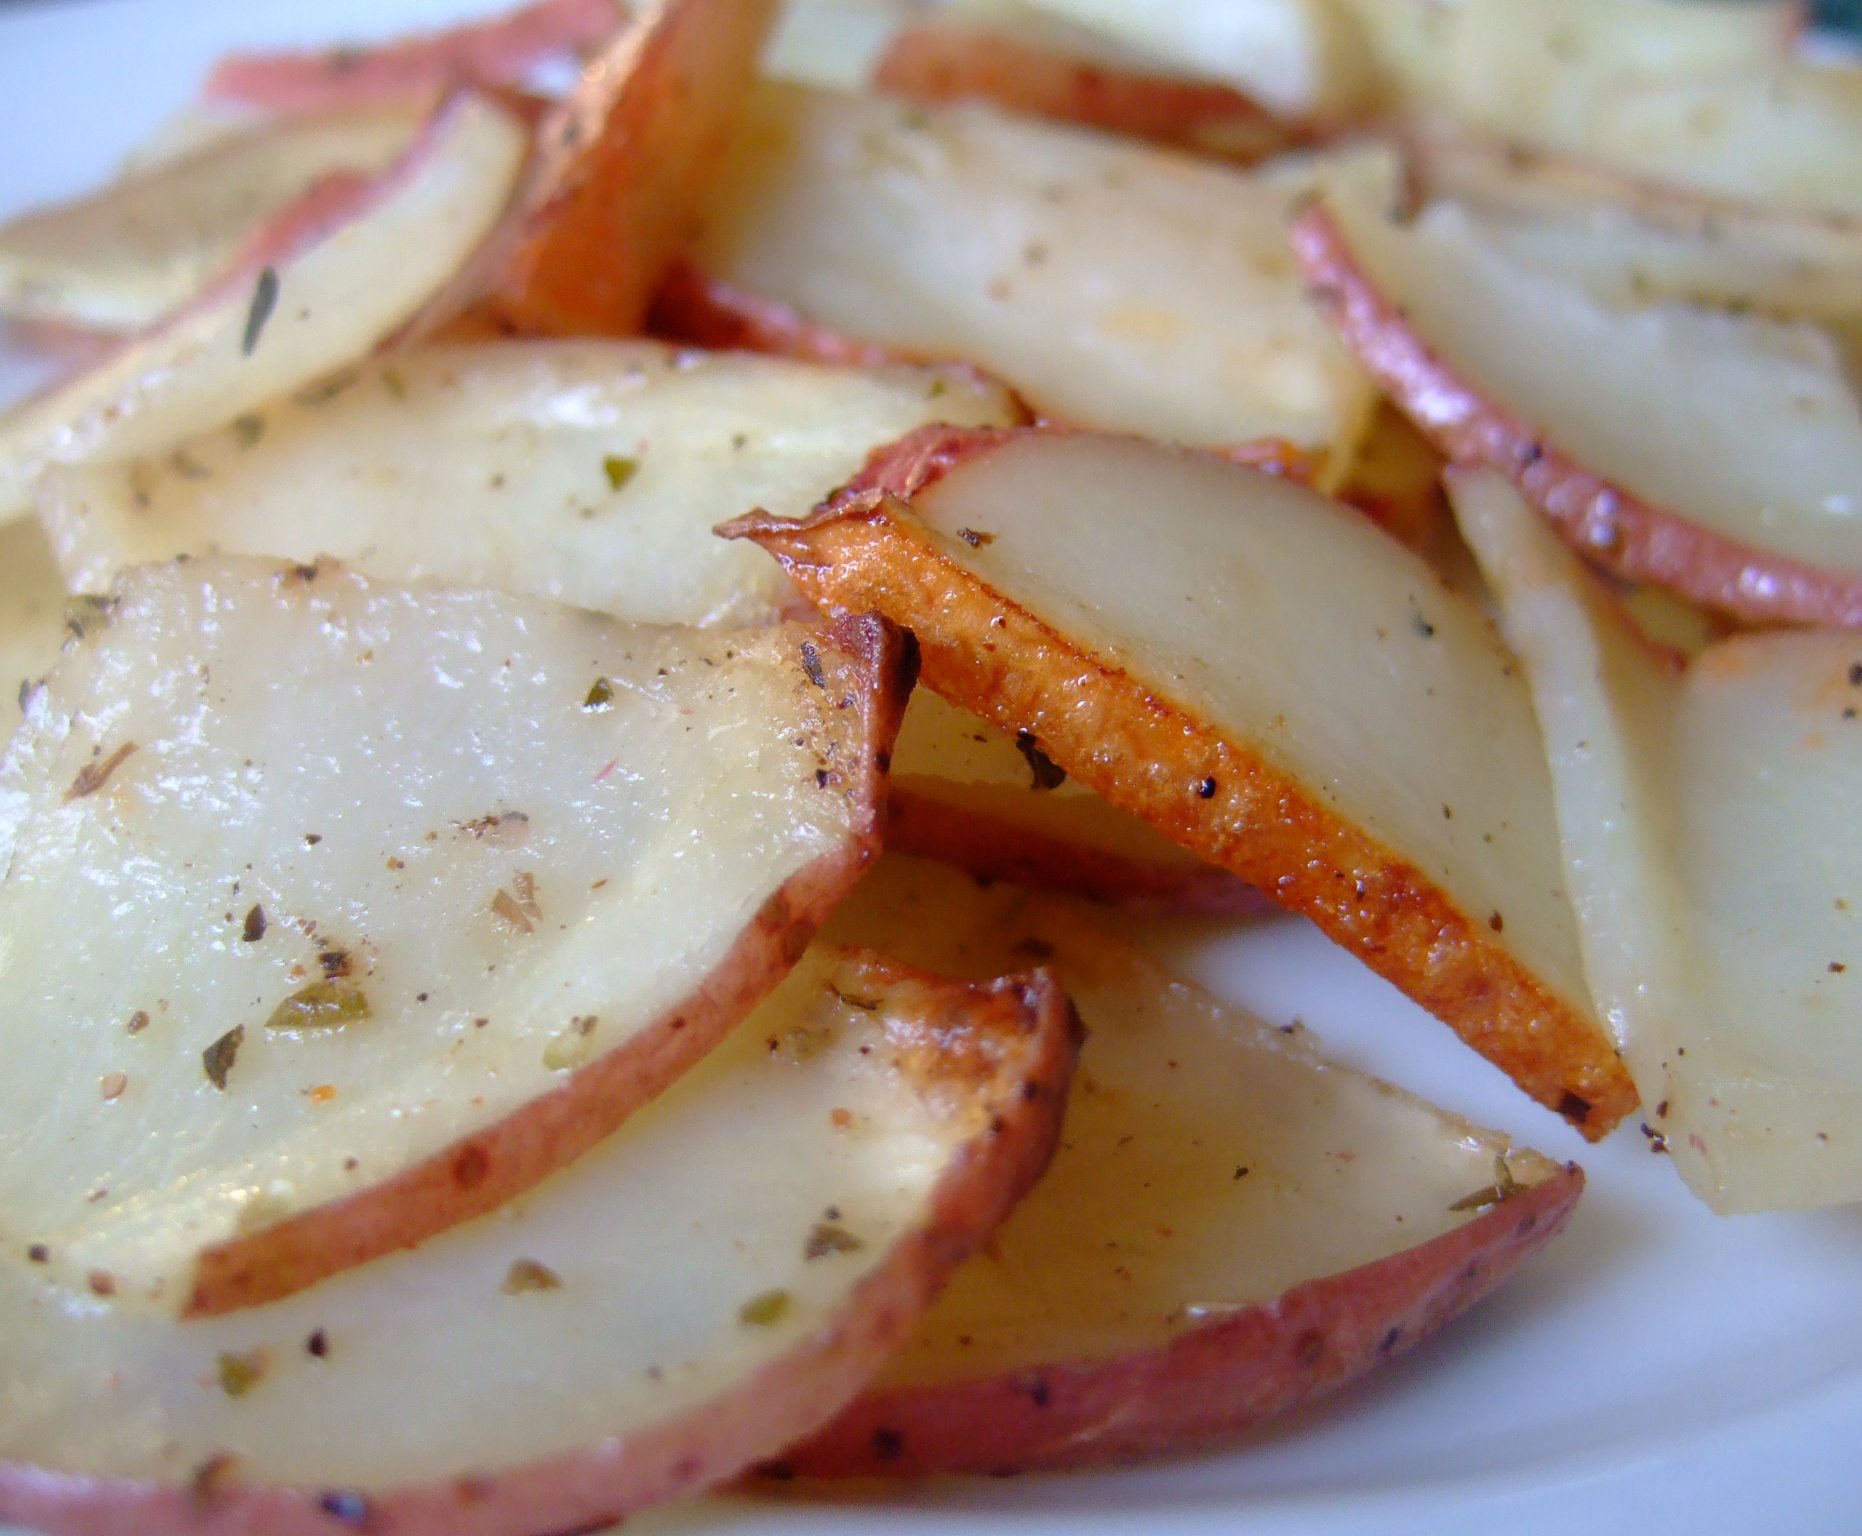 sliced red potatoes